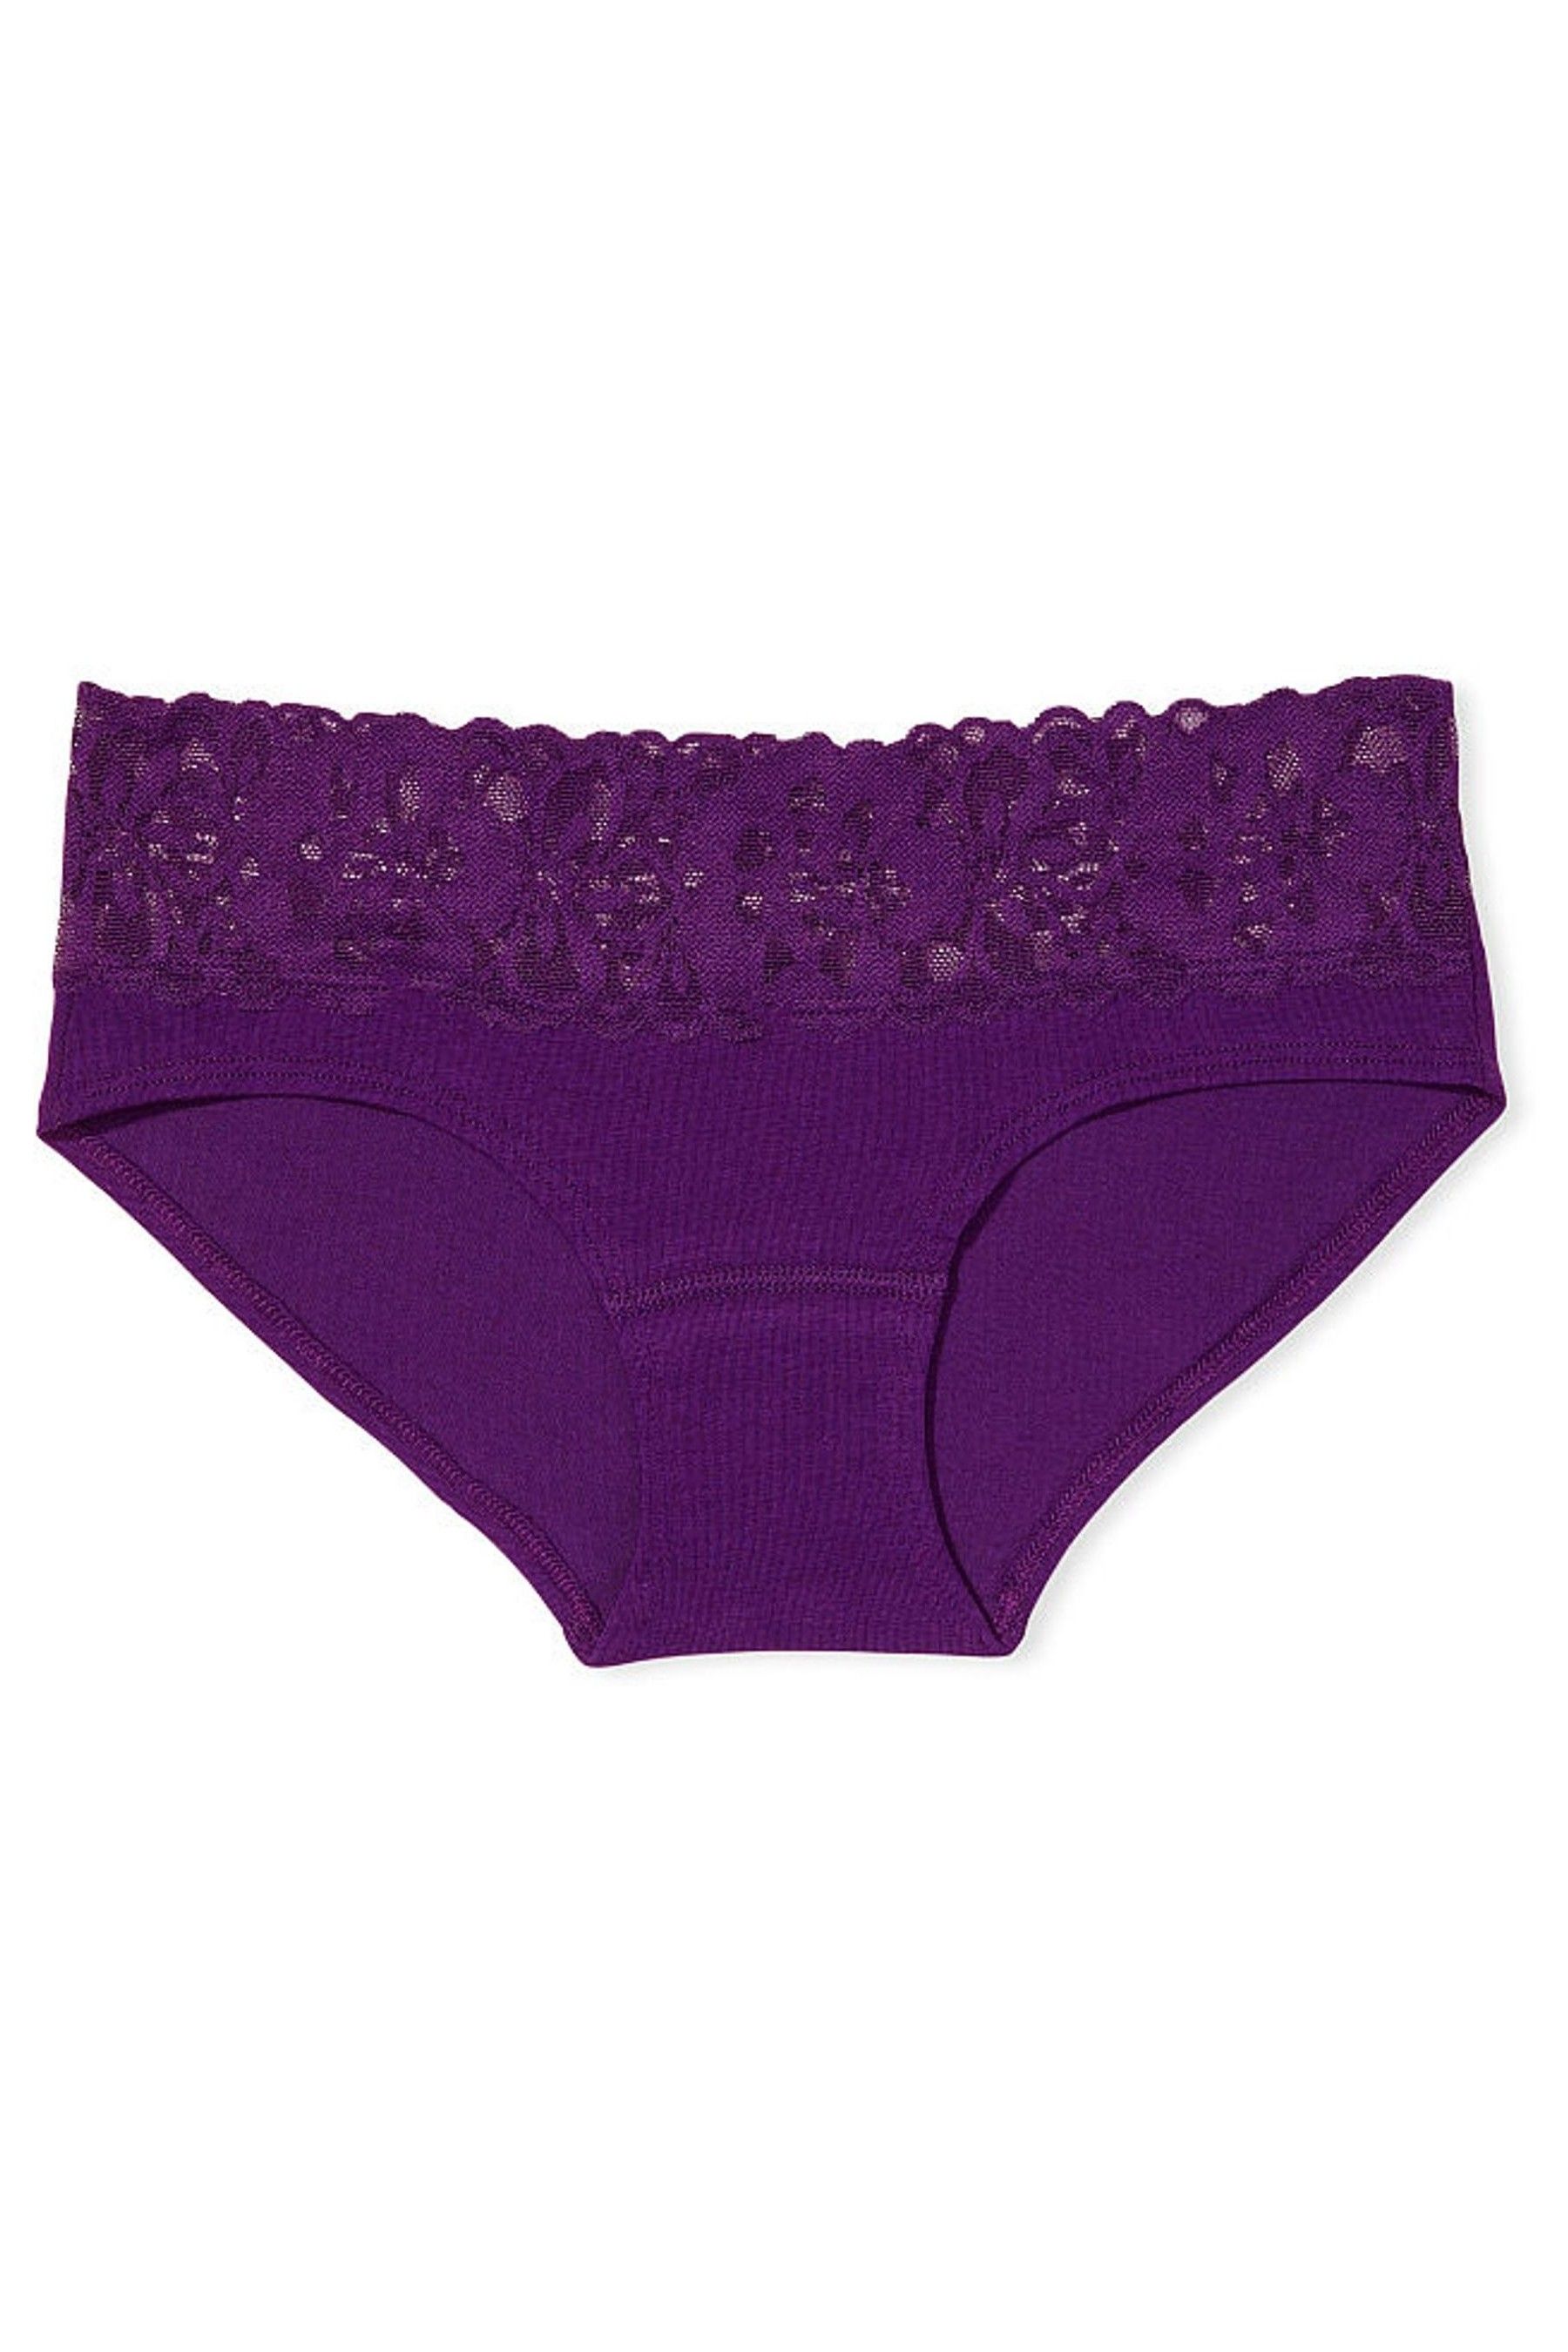 Buy Victoria's Secret Lace Waist Cotton Hipster Knickers from the ...